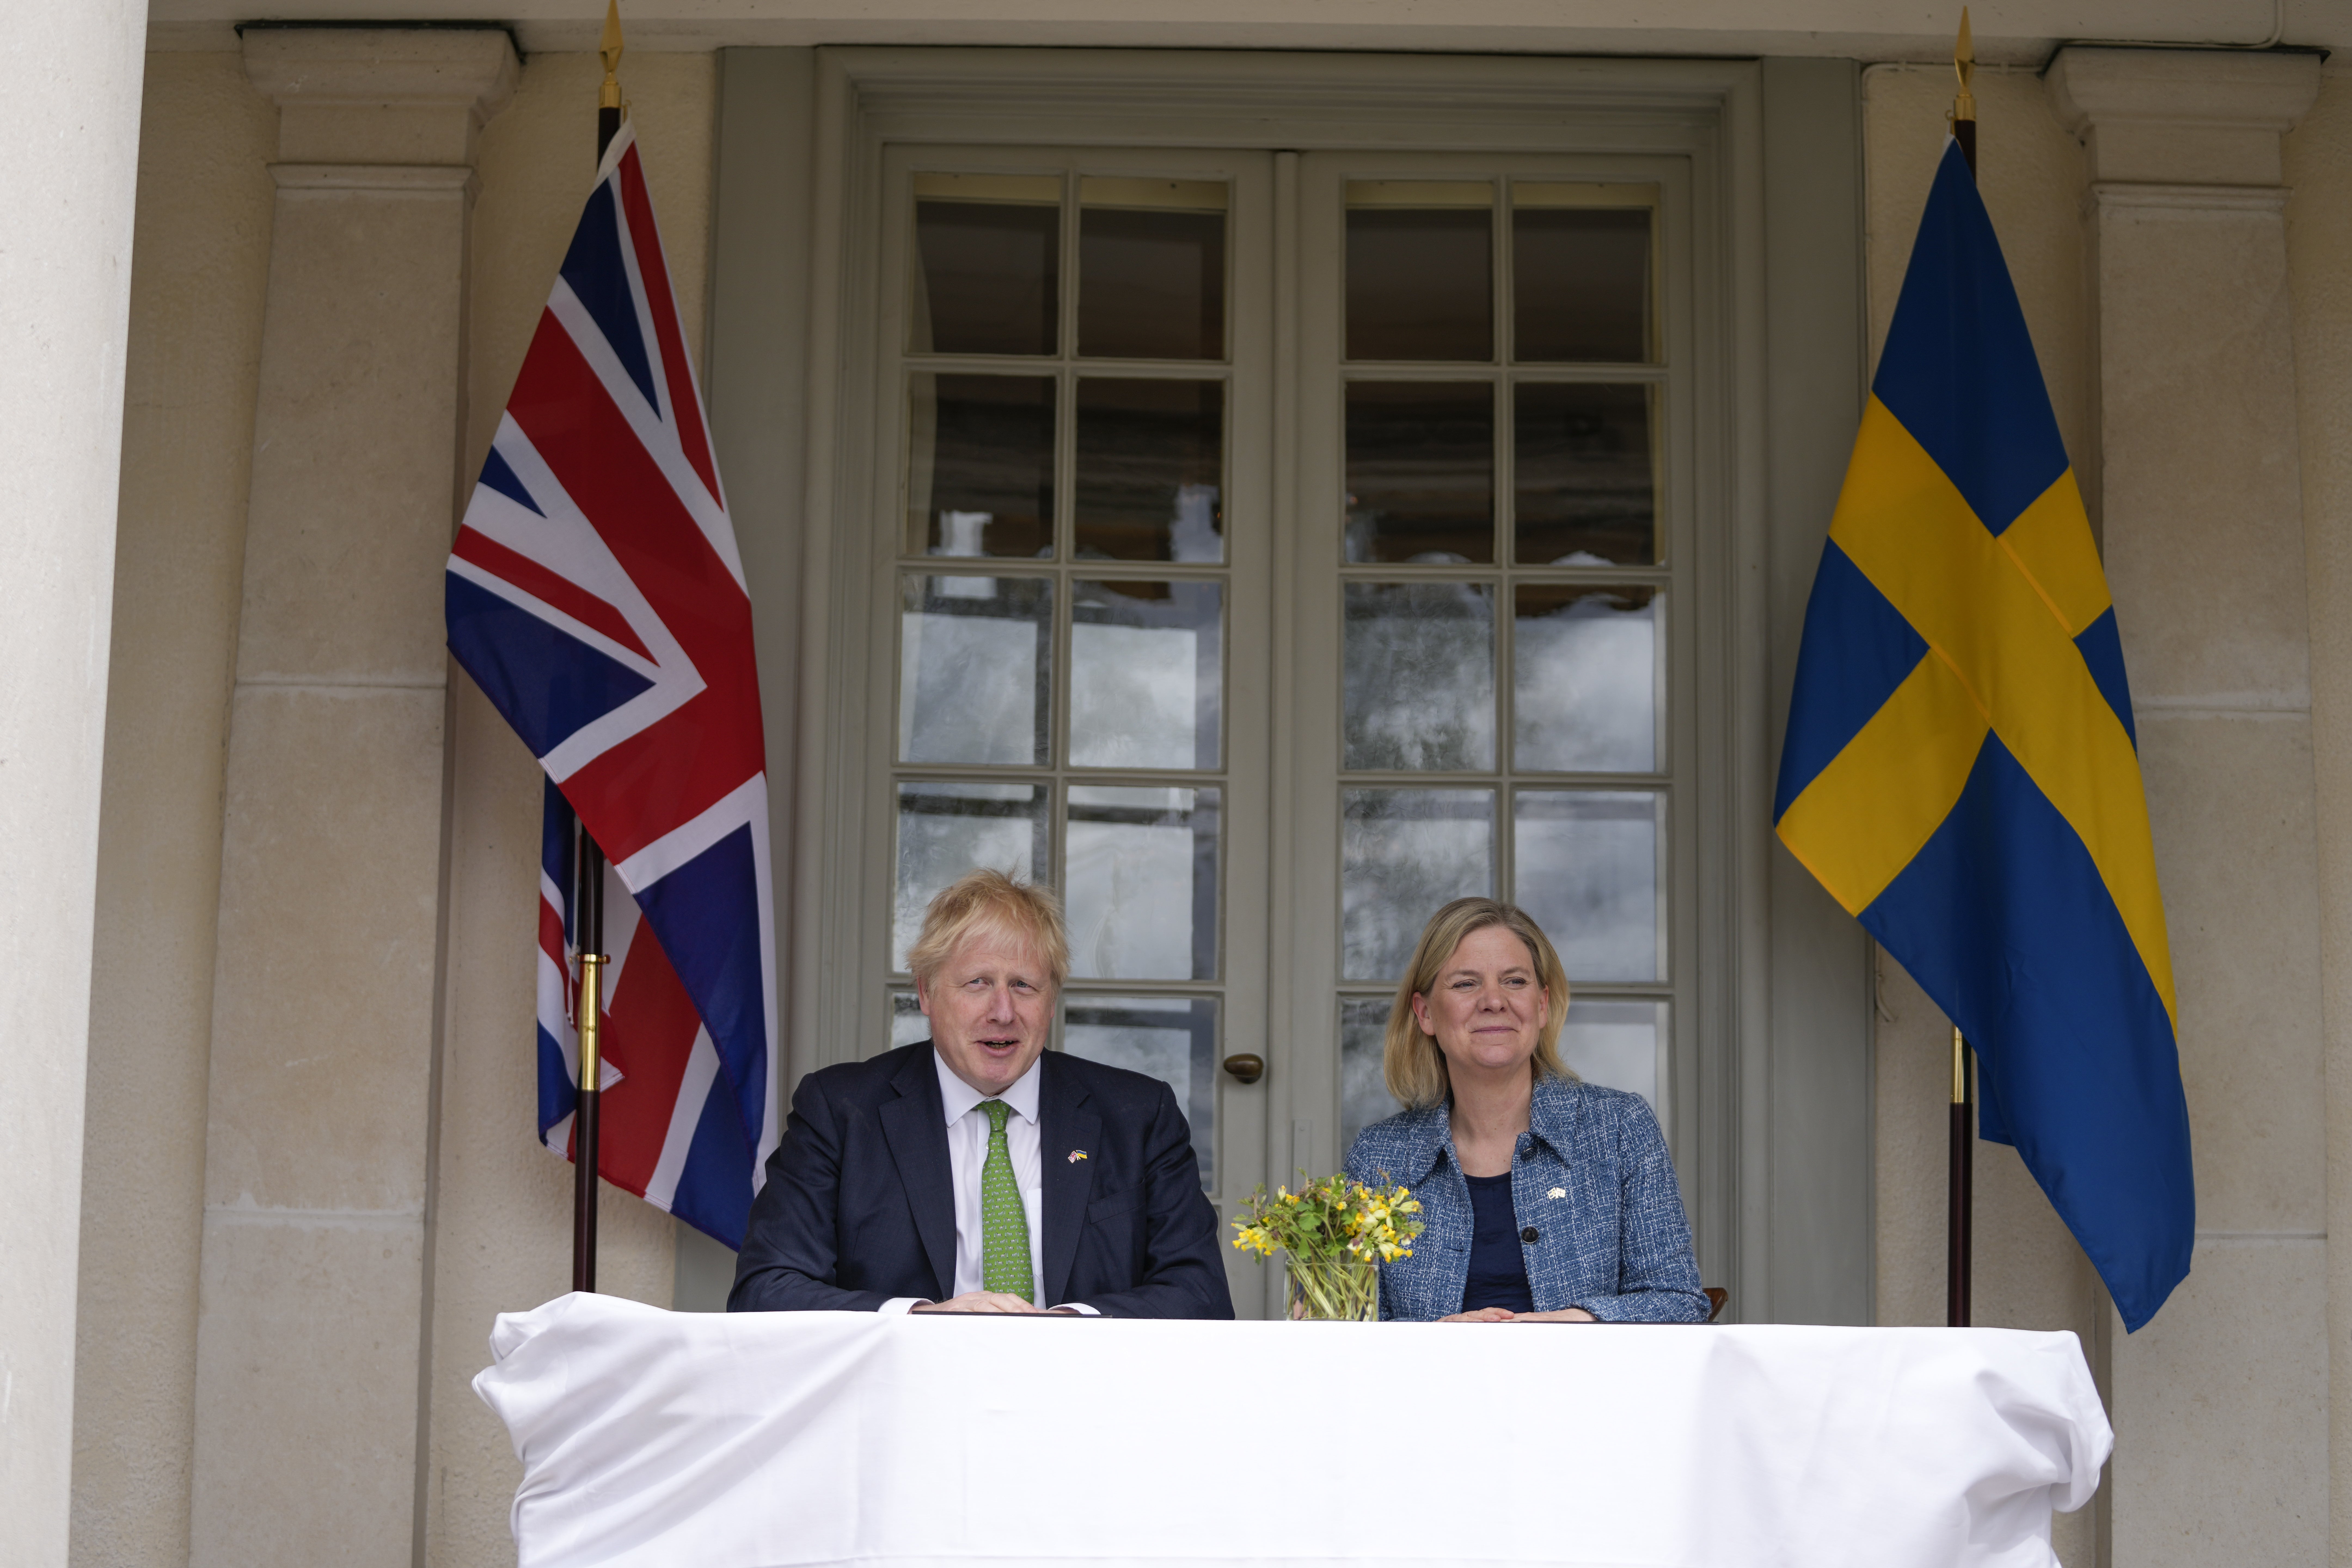 Boris Johnson was asked during a visit to Stockholm for talks with Swedish PM Magdalena Andersson whether now is the right time to pick a fight with the EU (Frank Augstein/PA)